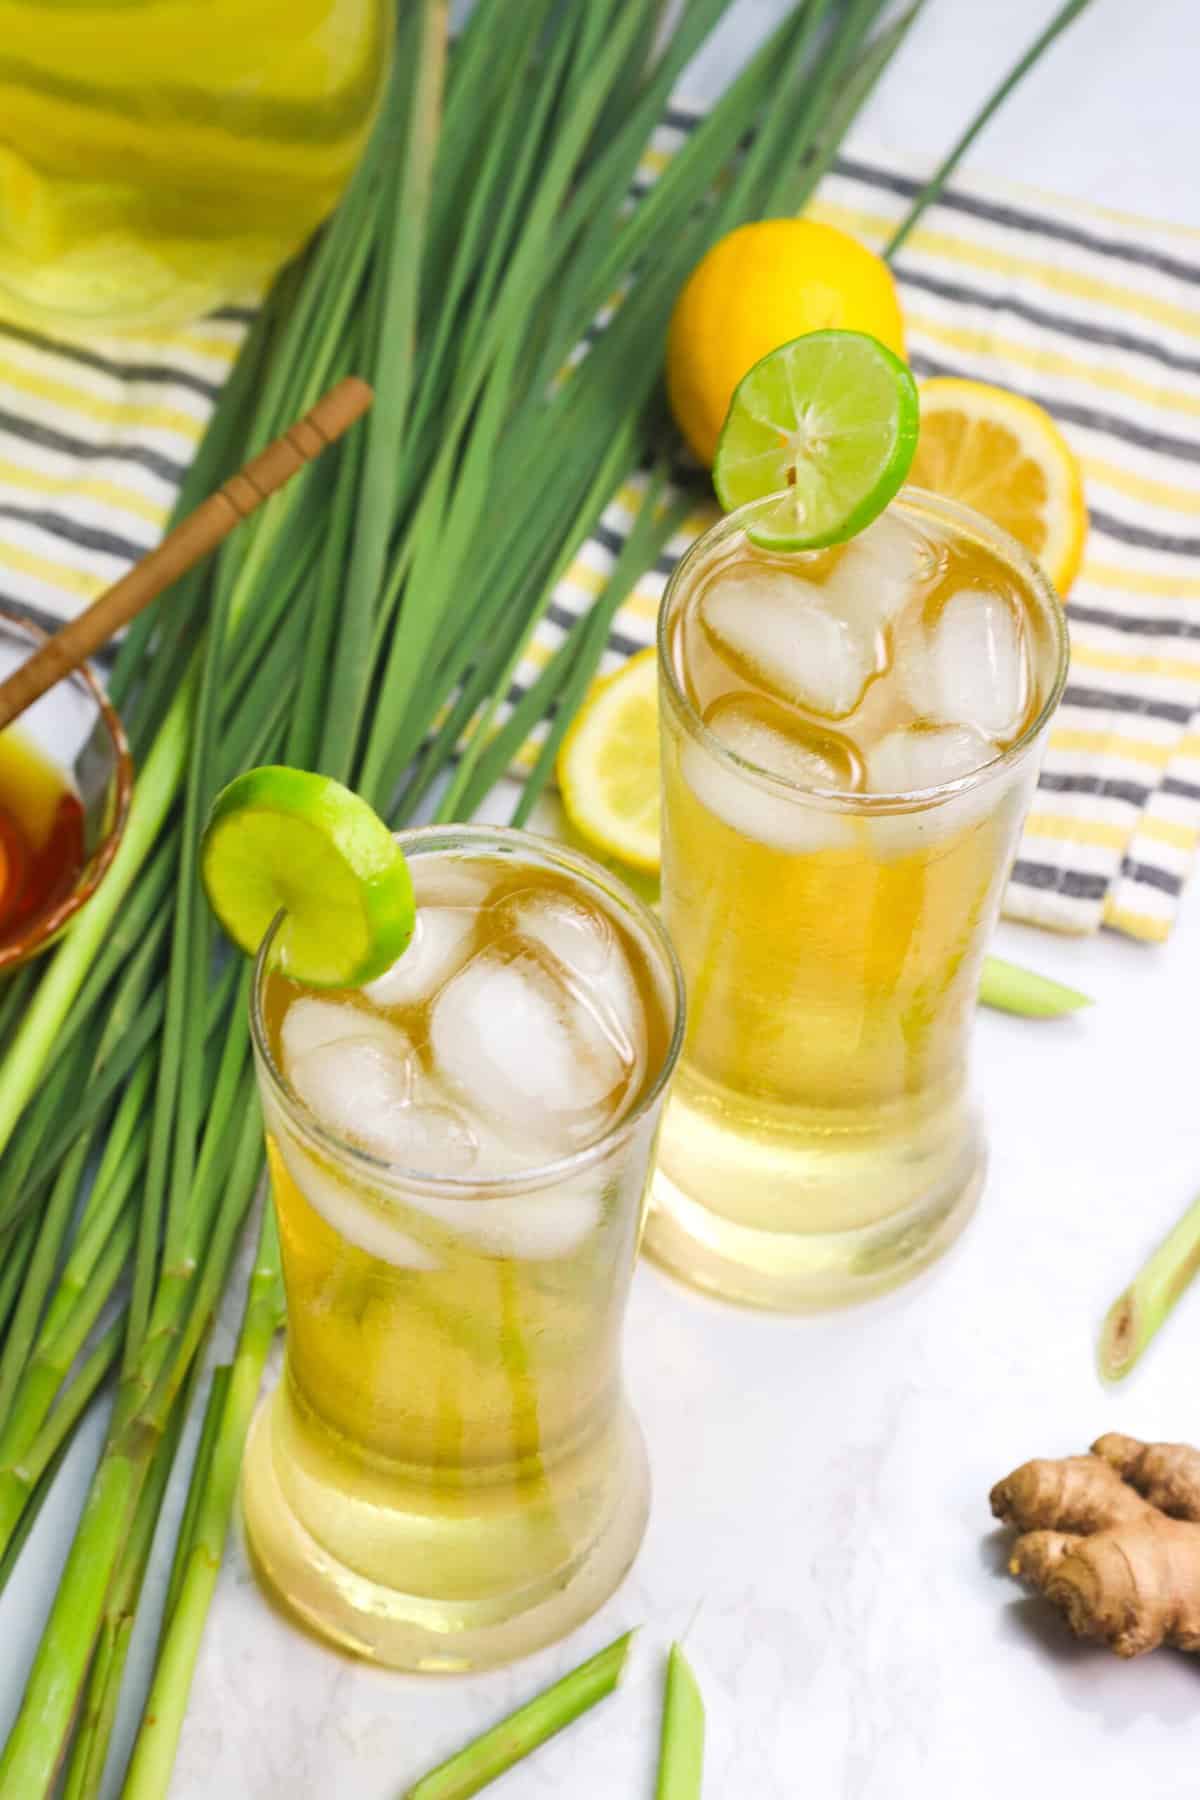 Serving up two ice cold glasses of homemade lemongrass tea